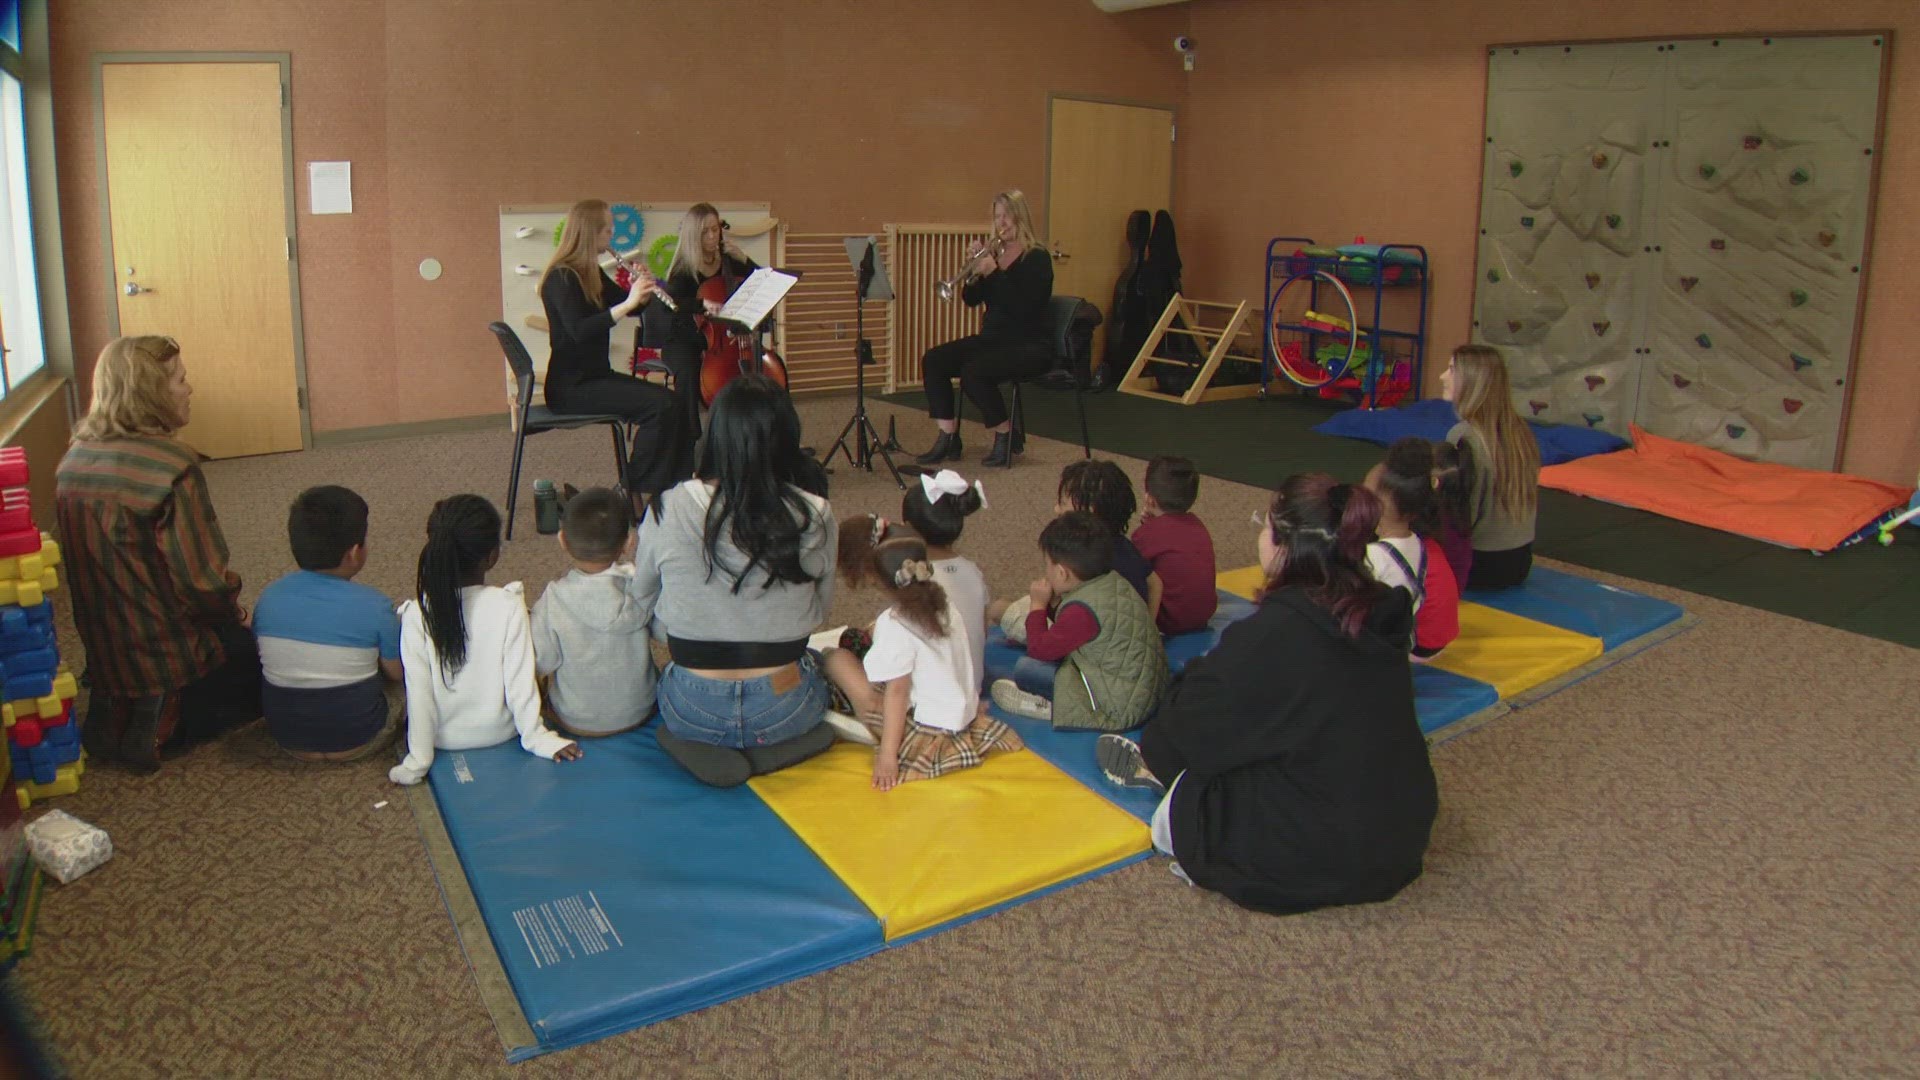 Clayton Early Learning knows music is a means of self-expression that can also play an important role in education.